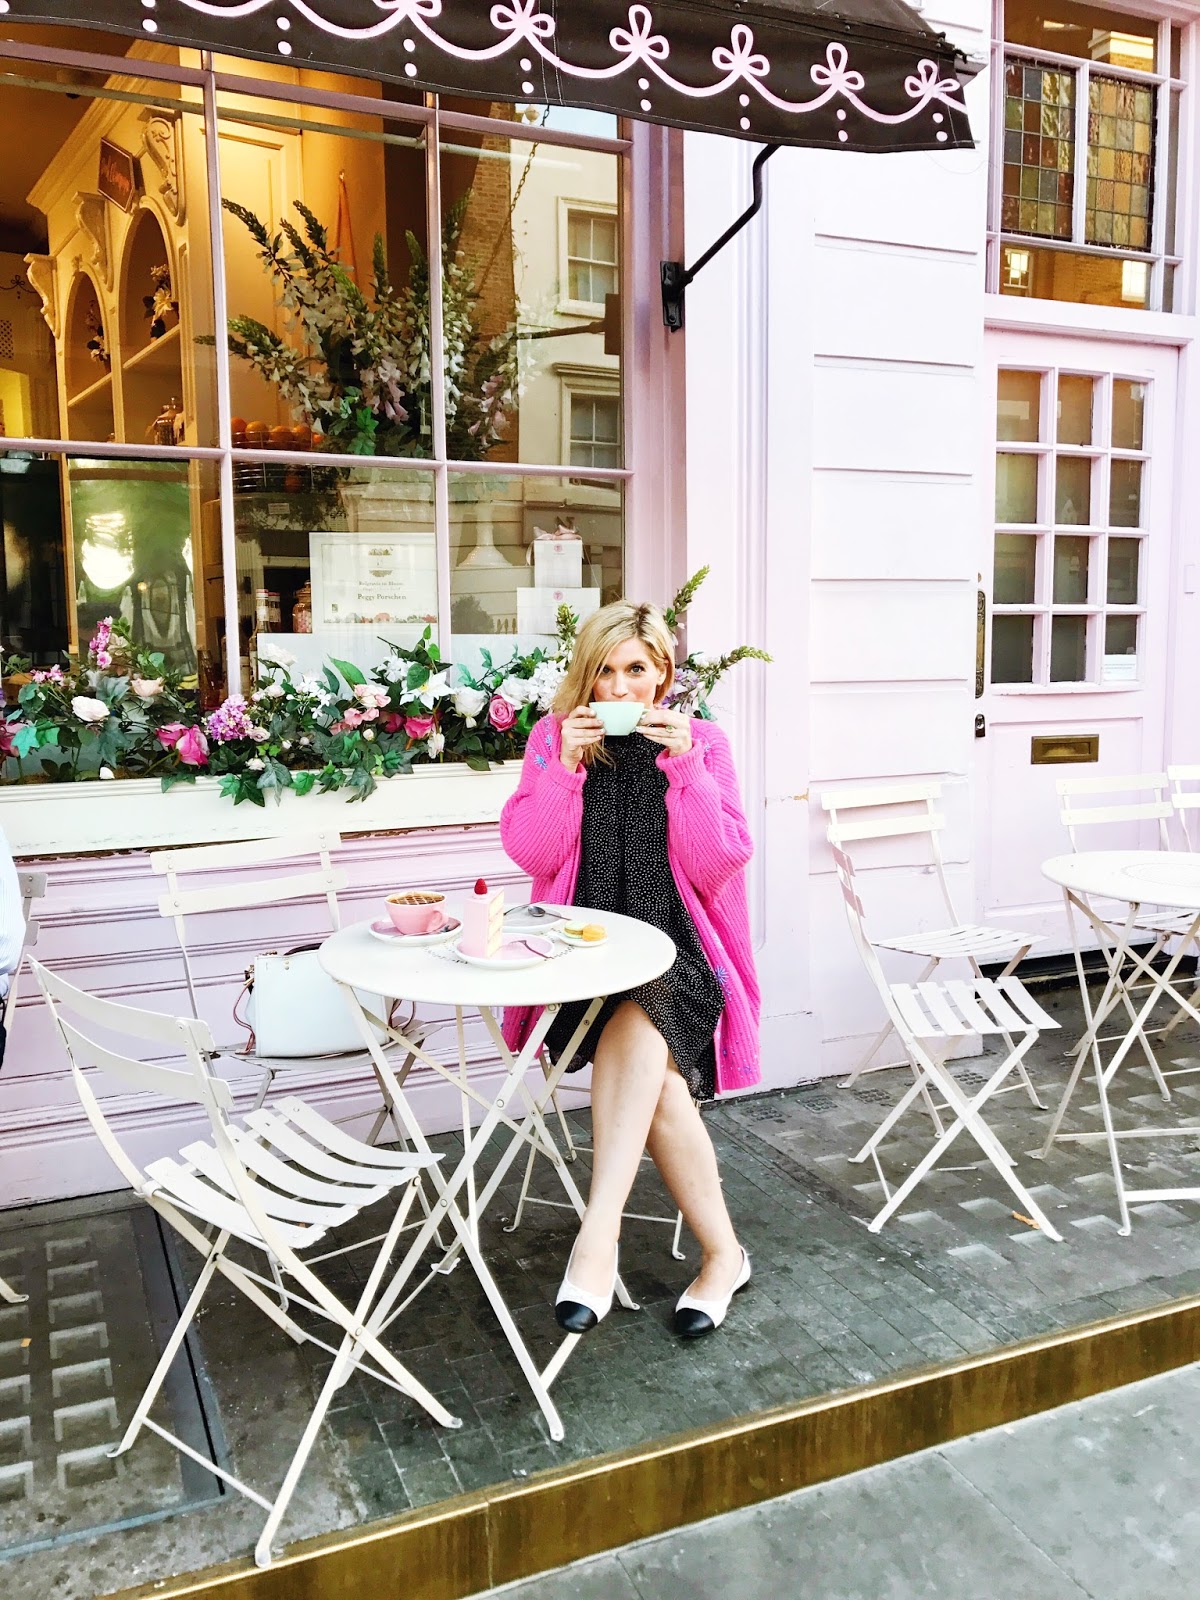 Bijuleni - 7 Instagram Perfect Brunch and Coffee Spots in London - Peggy Porschen Cakes